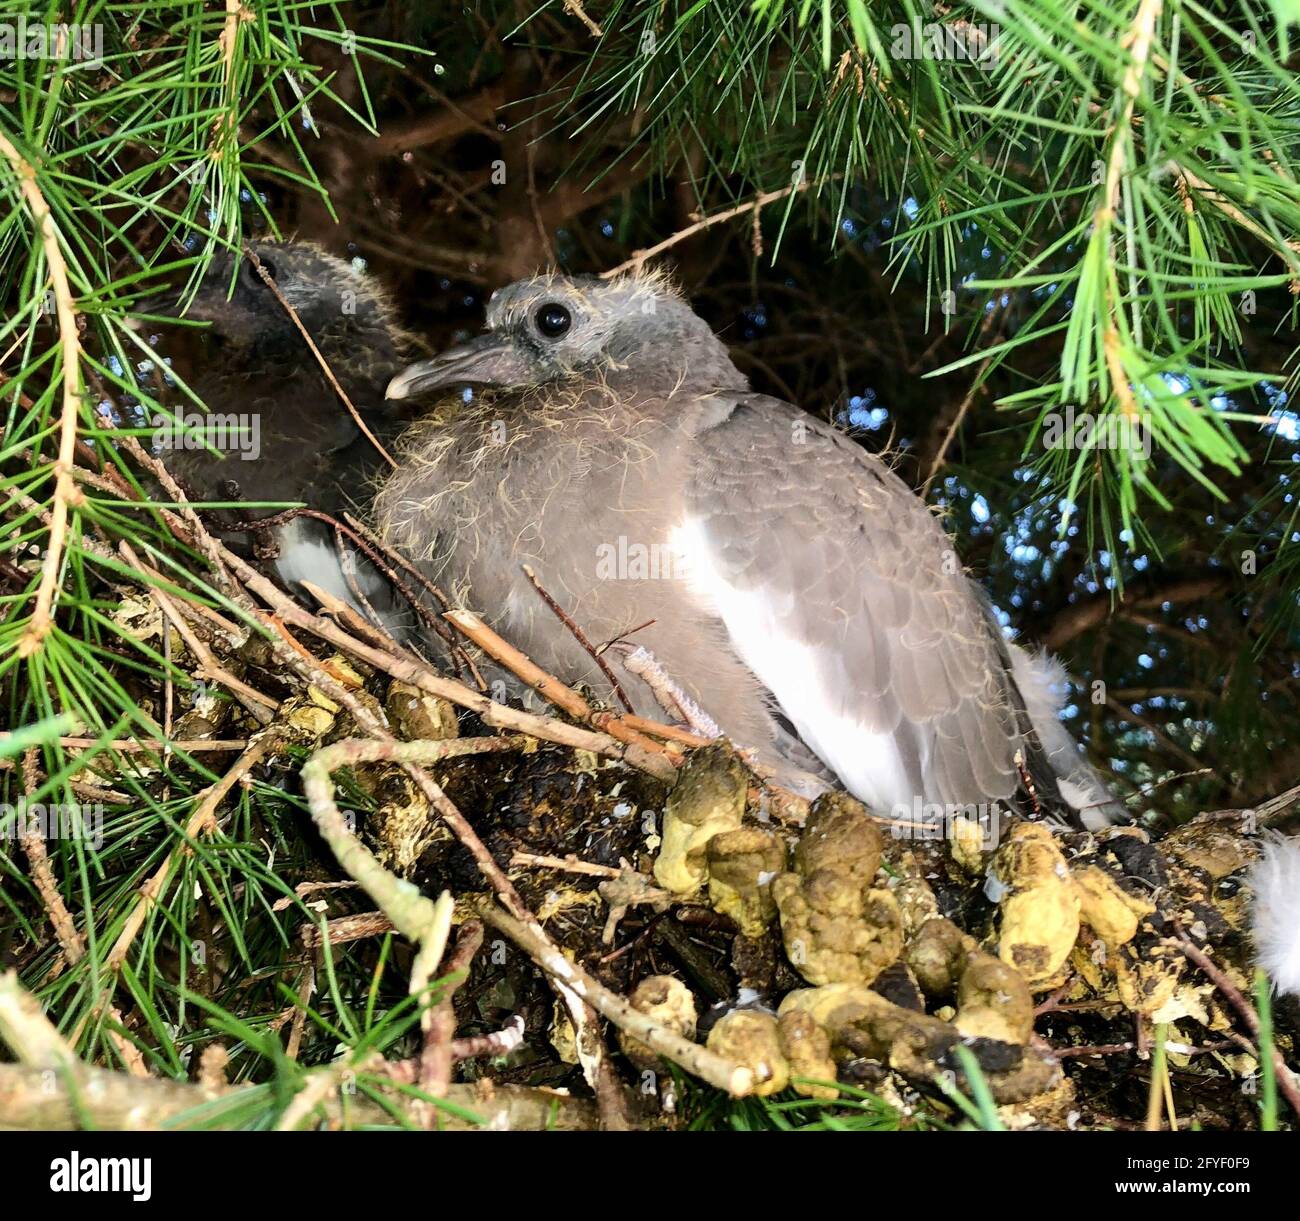 Two young Wood Pigeons in a nest - they are called Squabs at this age and feed entirely on a liquid diet which the parents regurgitate. Stock Photo